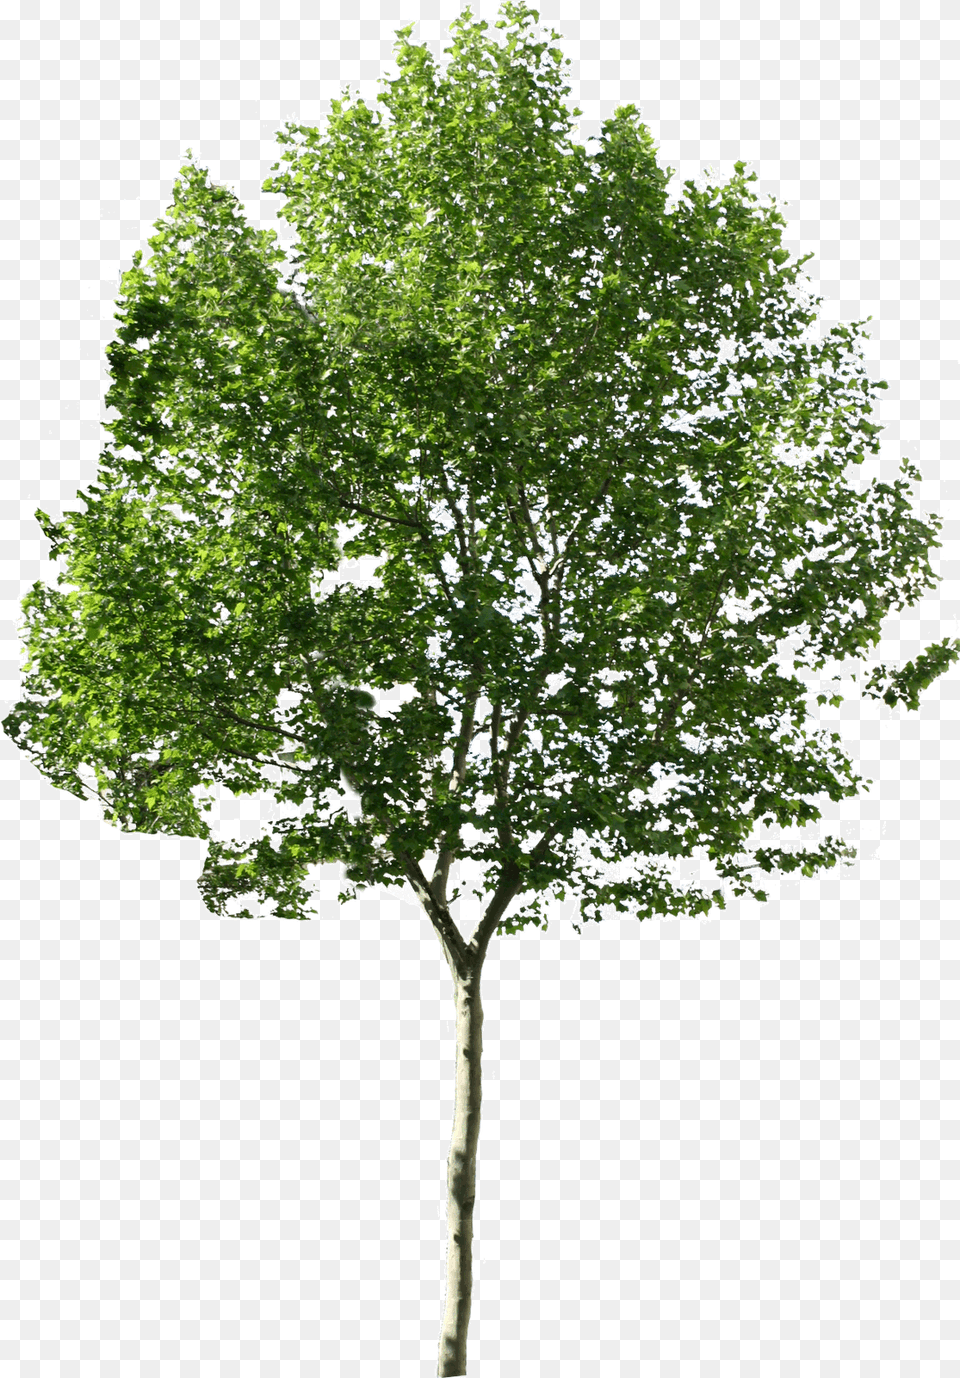 Tree Images Quality Transparent Trees For Photoshop, Maple, Oak, Plant, Sycamore Png Image